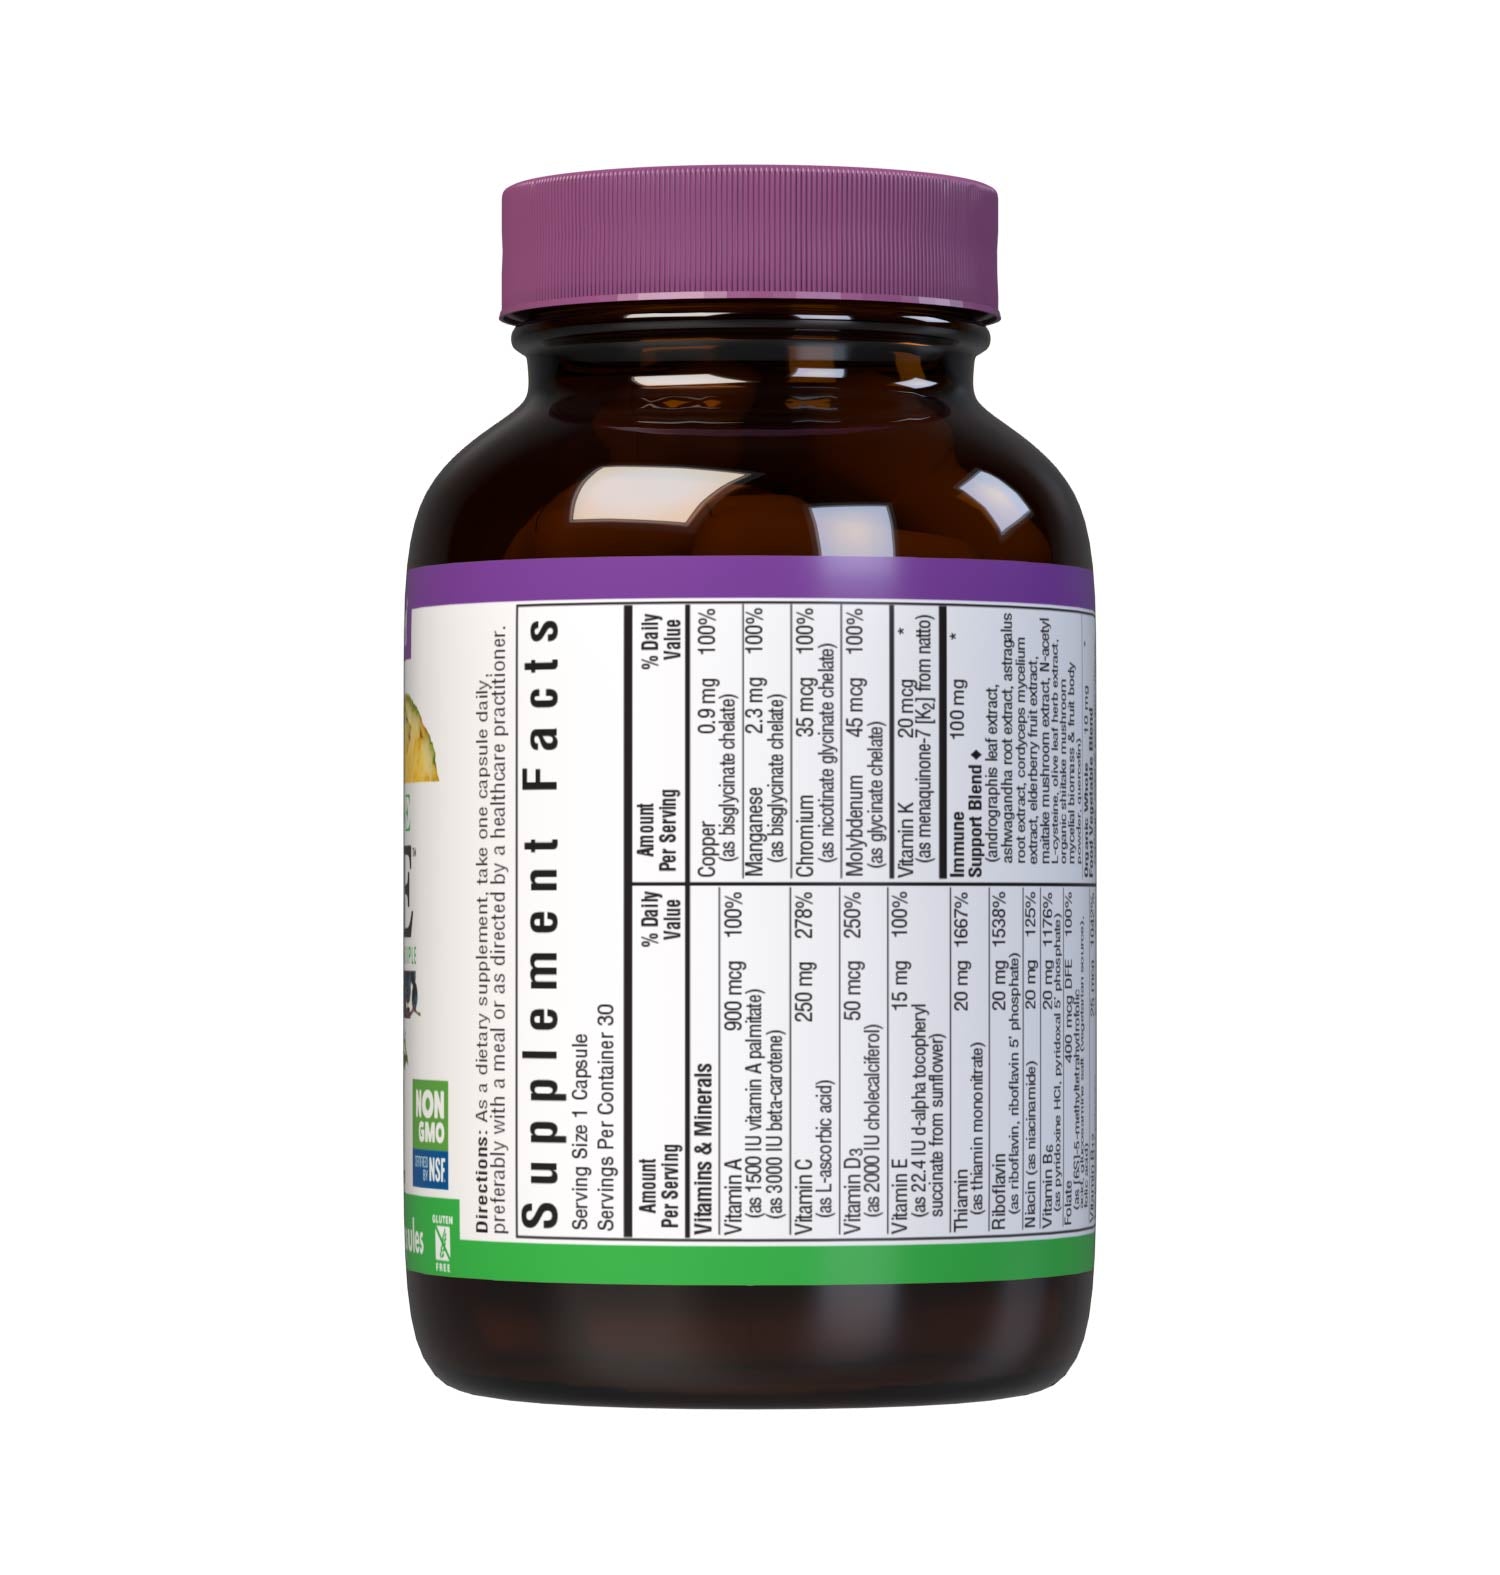 Bluebonnet Nutrition's Immune One 30 vegetable capsules delivers targeted nutrients for respiratory support, sinus comfort, immune defense and antioxidant protection including: Vitamin E derived from Non-GMO sunflower oil Active coenzyme forms of B vitamins. Supplement facts panel. #size_30 count